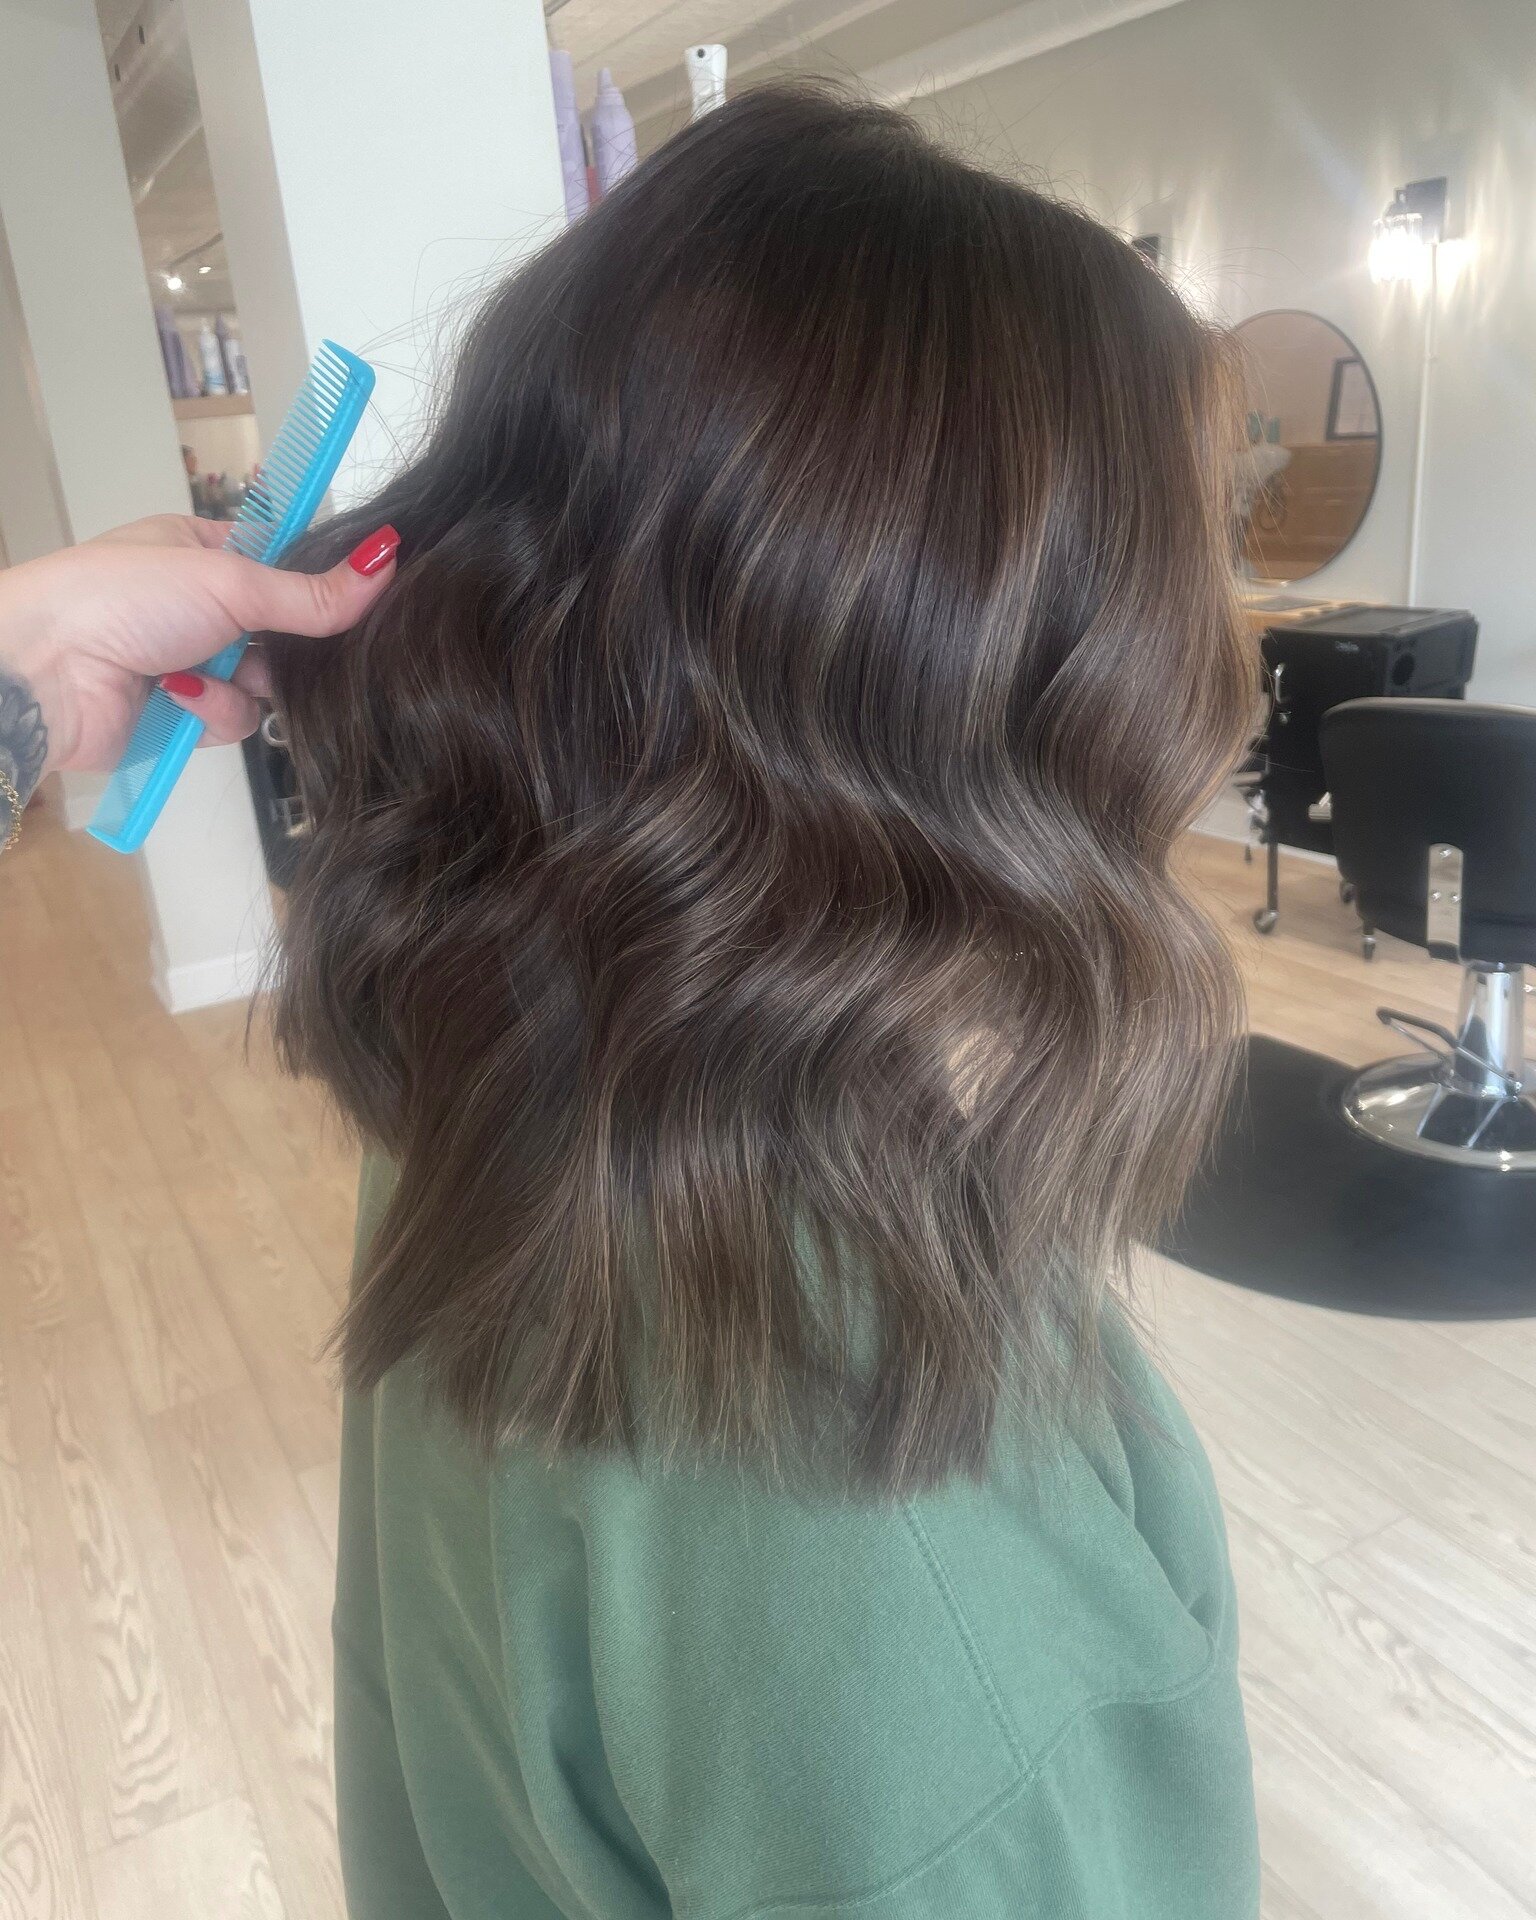 This dimensional brunette by Lacey is perfect! We love how subtle the highlights are throughout the hair giving this client a very easy grow out! 

#MarshallMI #DesignStudioEast #BrunetteInspiration #hairtrends